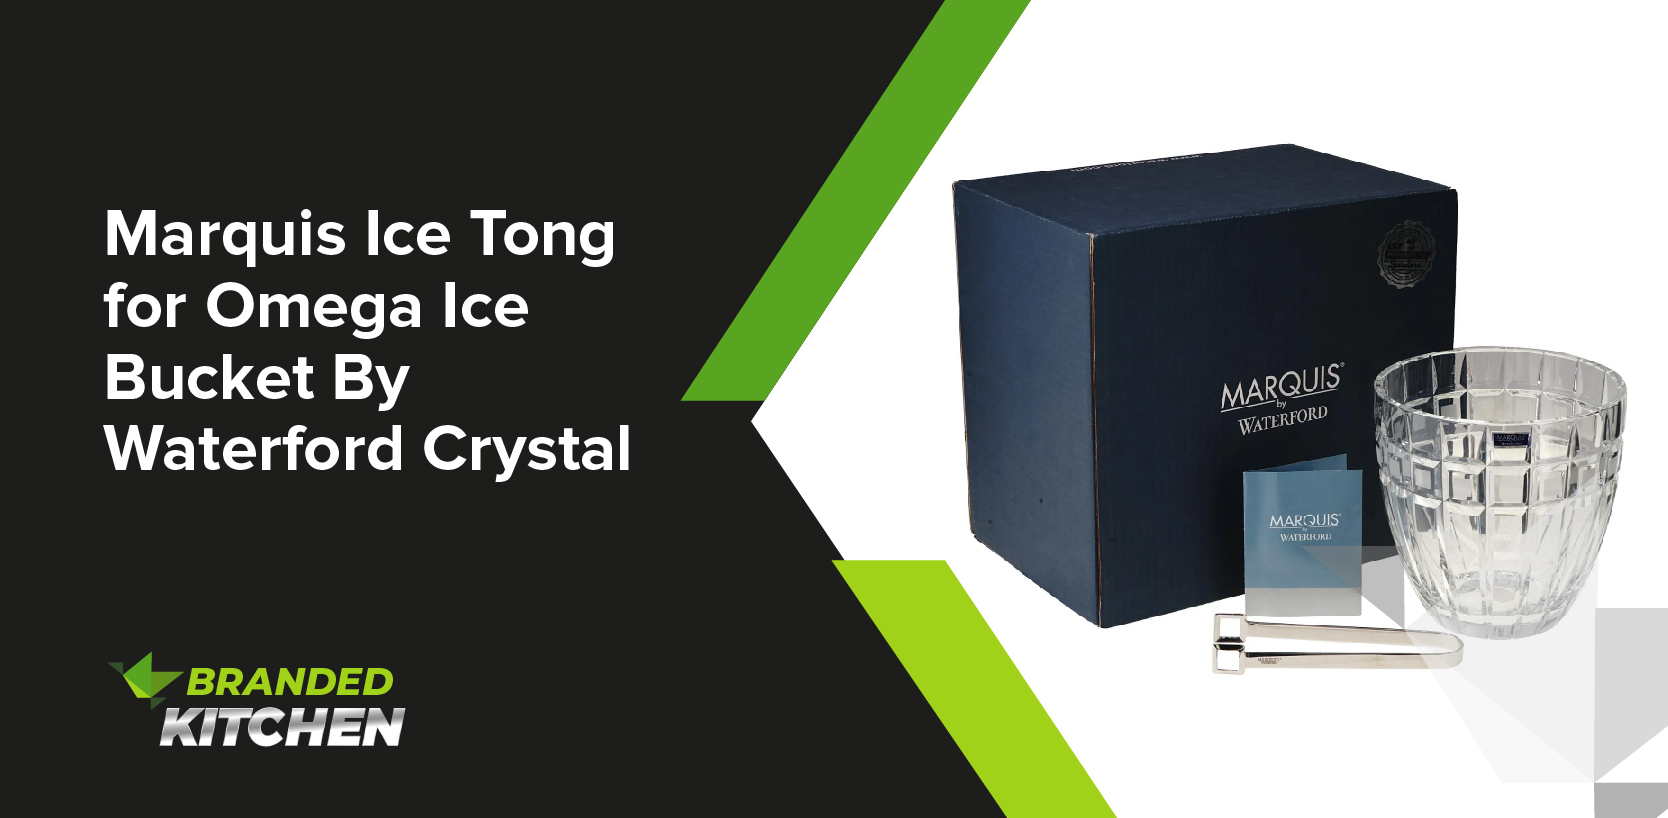 Marquis Ice Tong for Omega Ice Bucket By Waterford Crystal